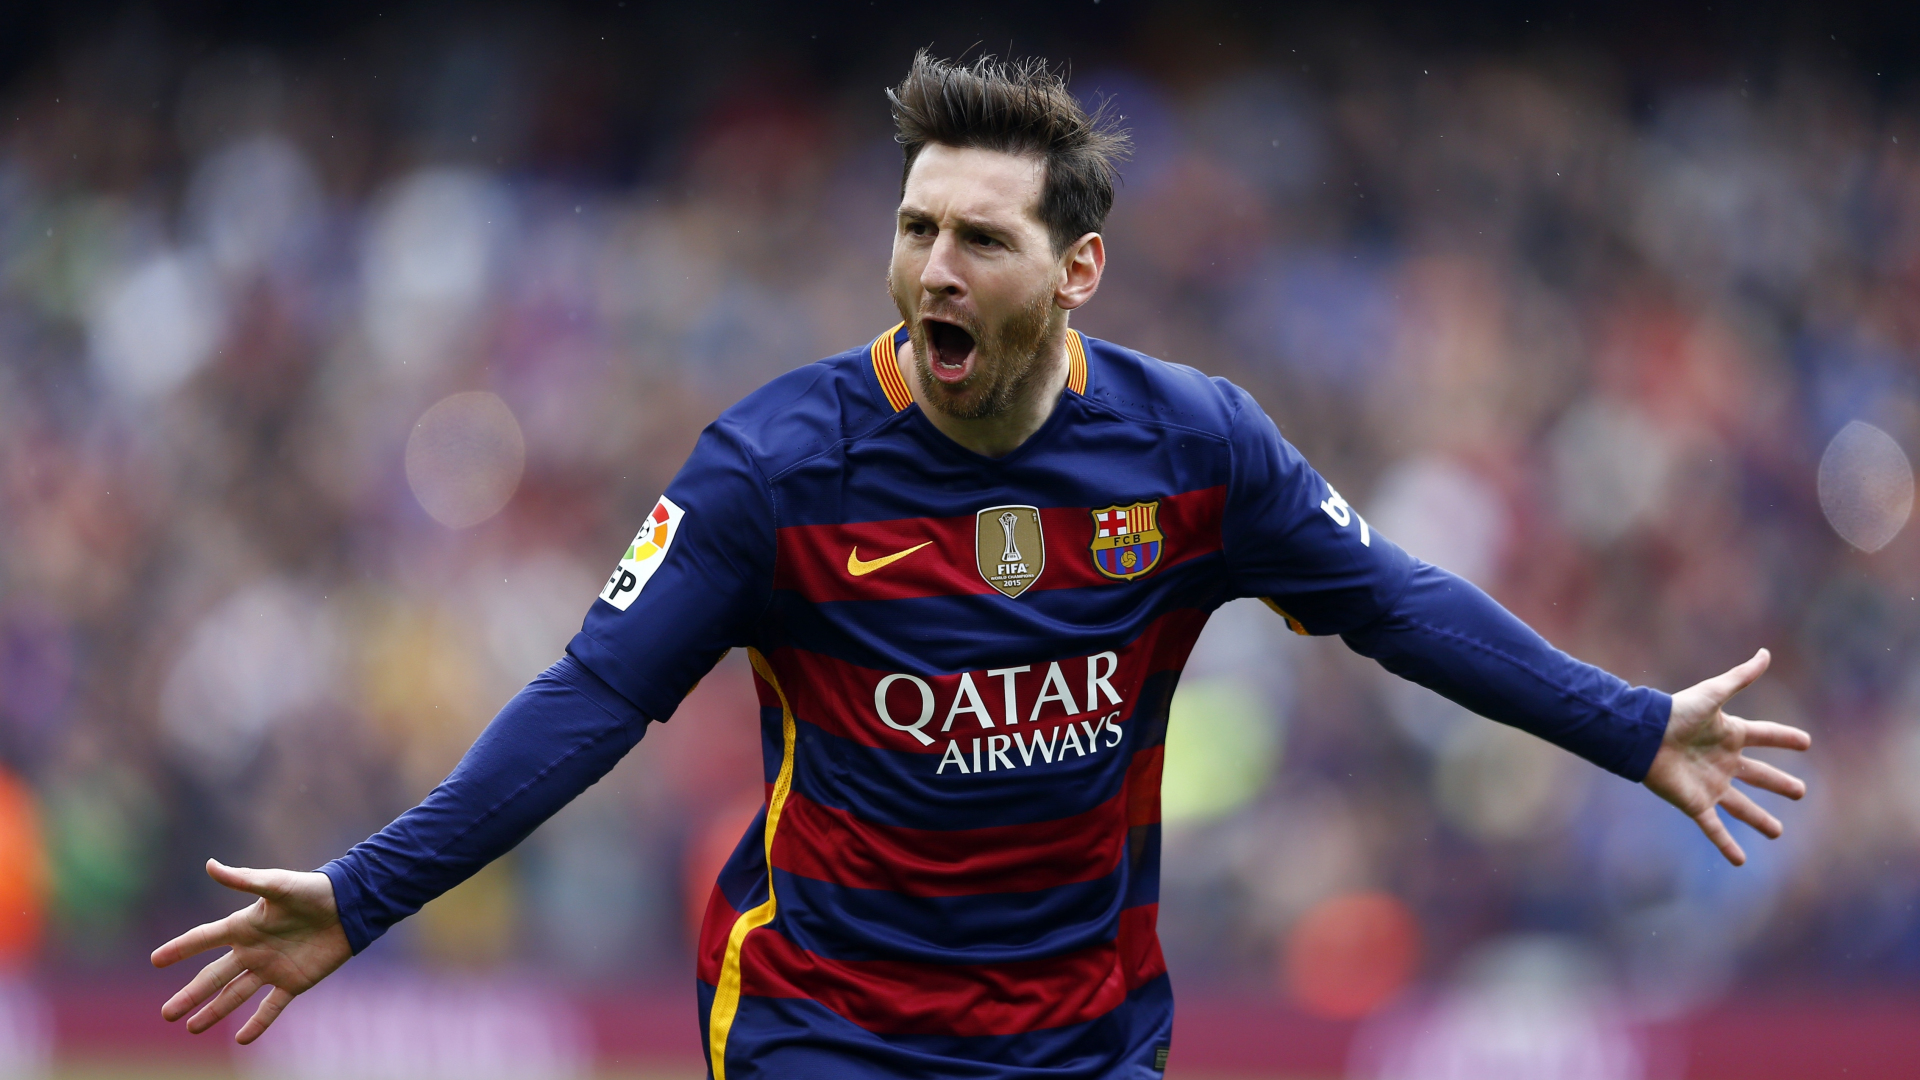 Download wallpaper 1920x1080 lionel messi, goal, celebrity, football  player, full hd, hdtv, fhd, 1080p wallpaper, 1920x1080 hd background, 9589